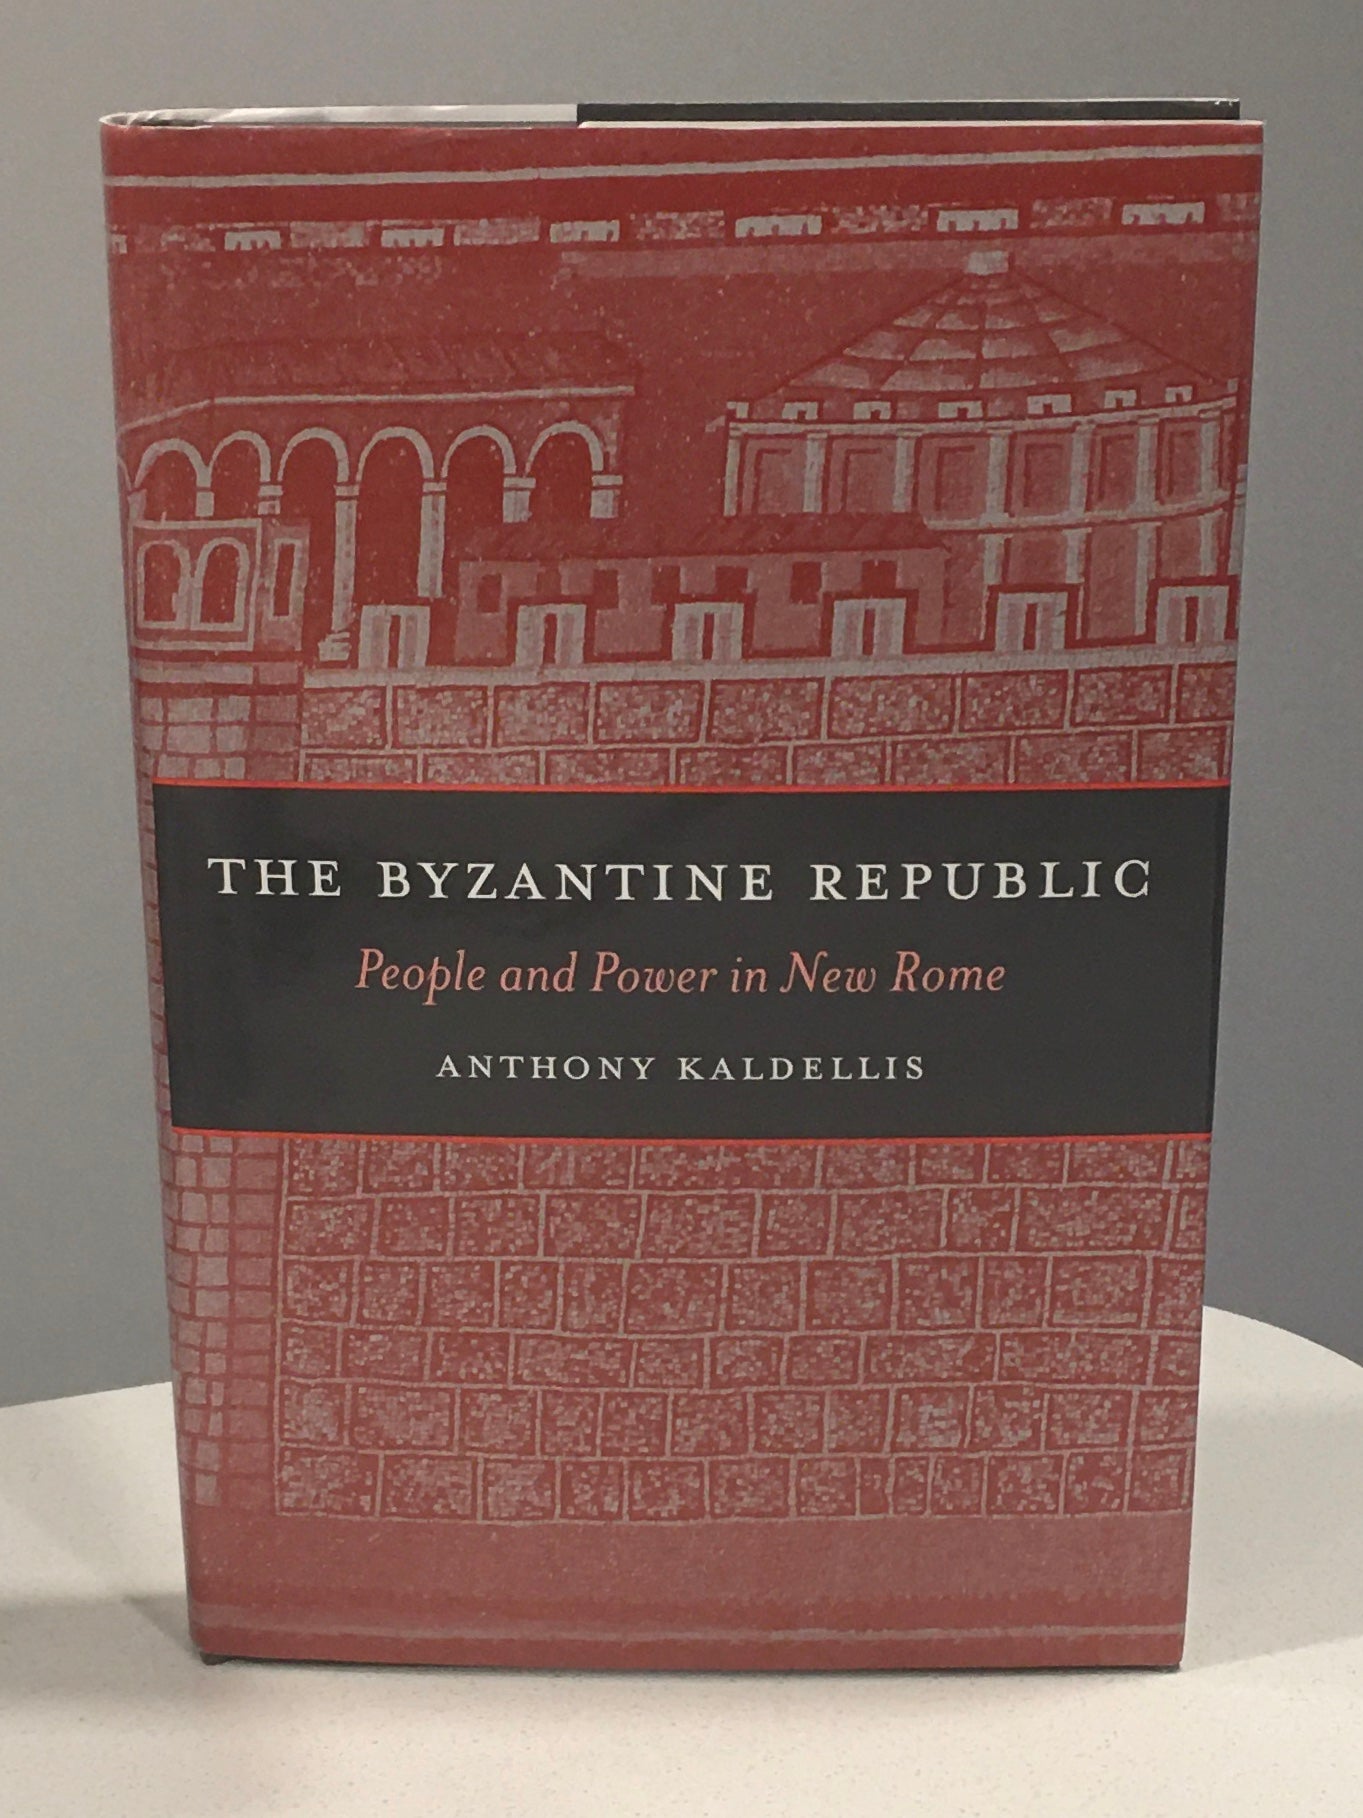 The Byzantine Republic  People and Power in New Rome